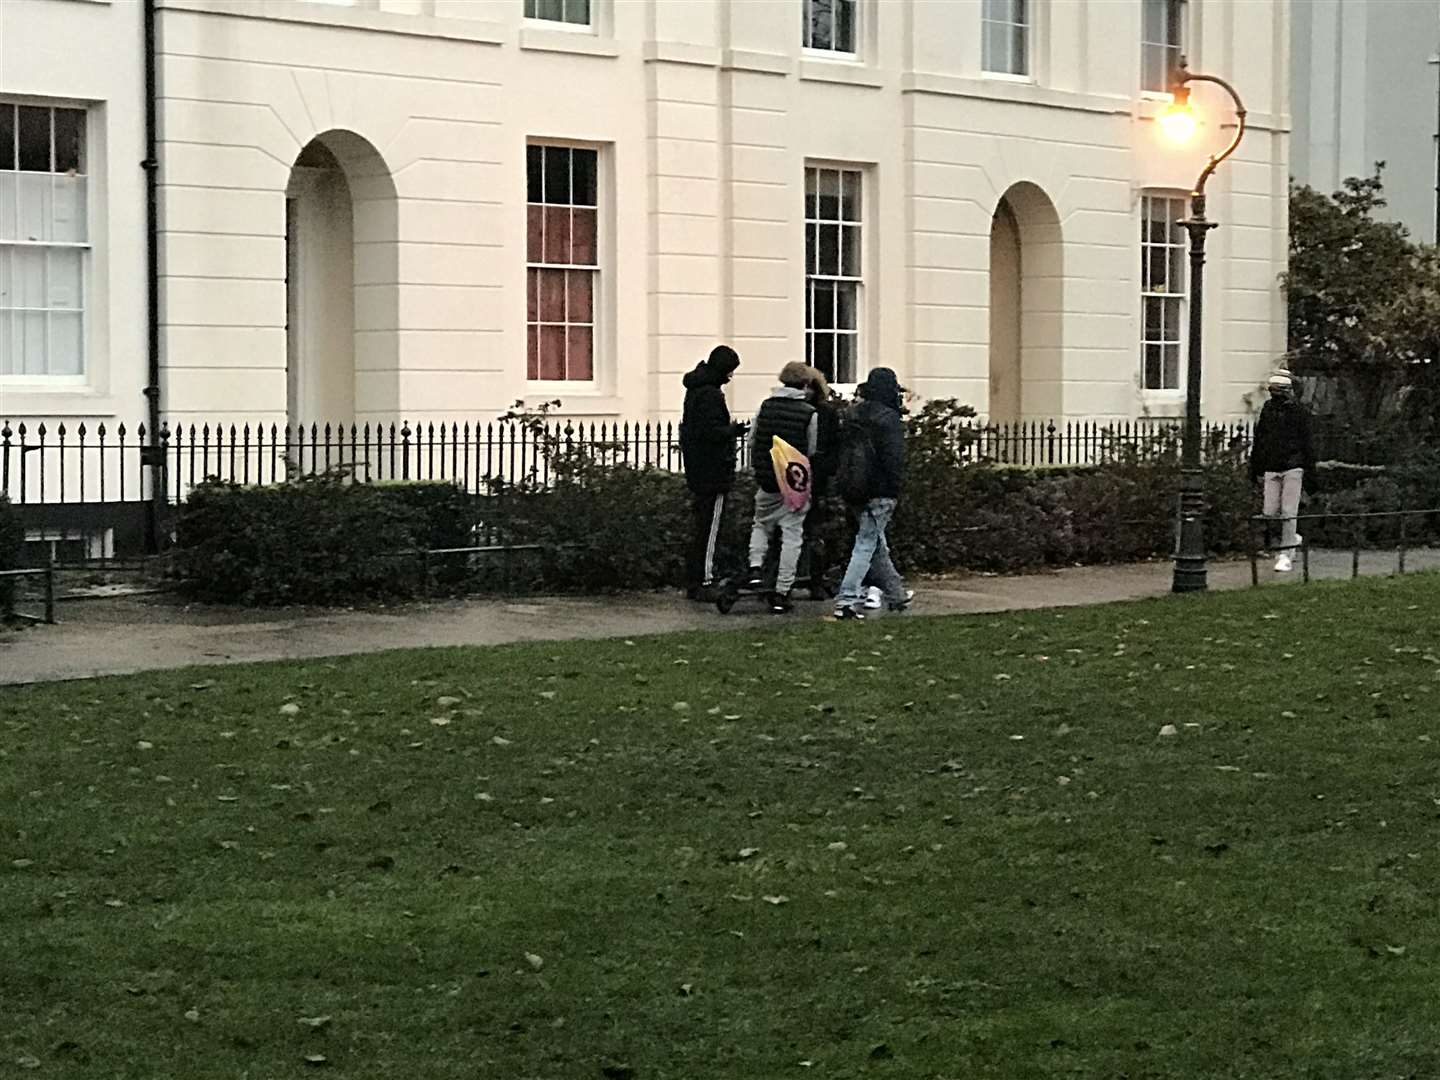 A group of e-scooter users in Dane John Gardens, Canterbury